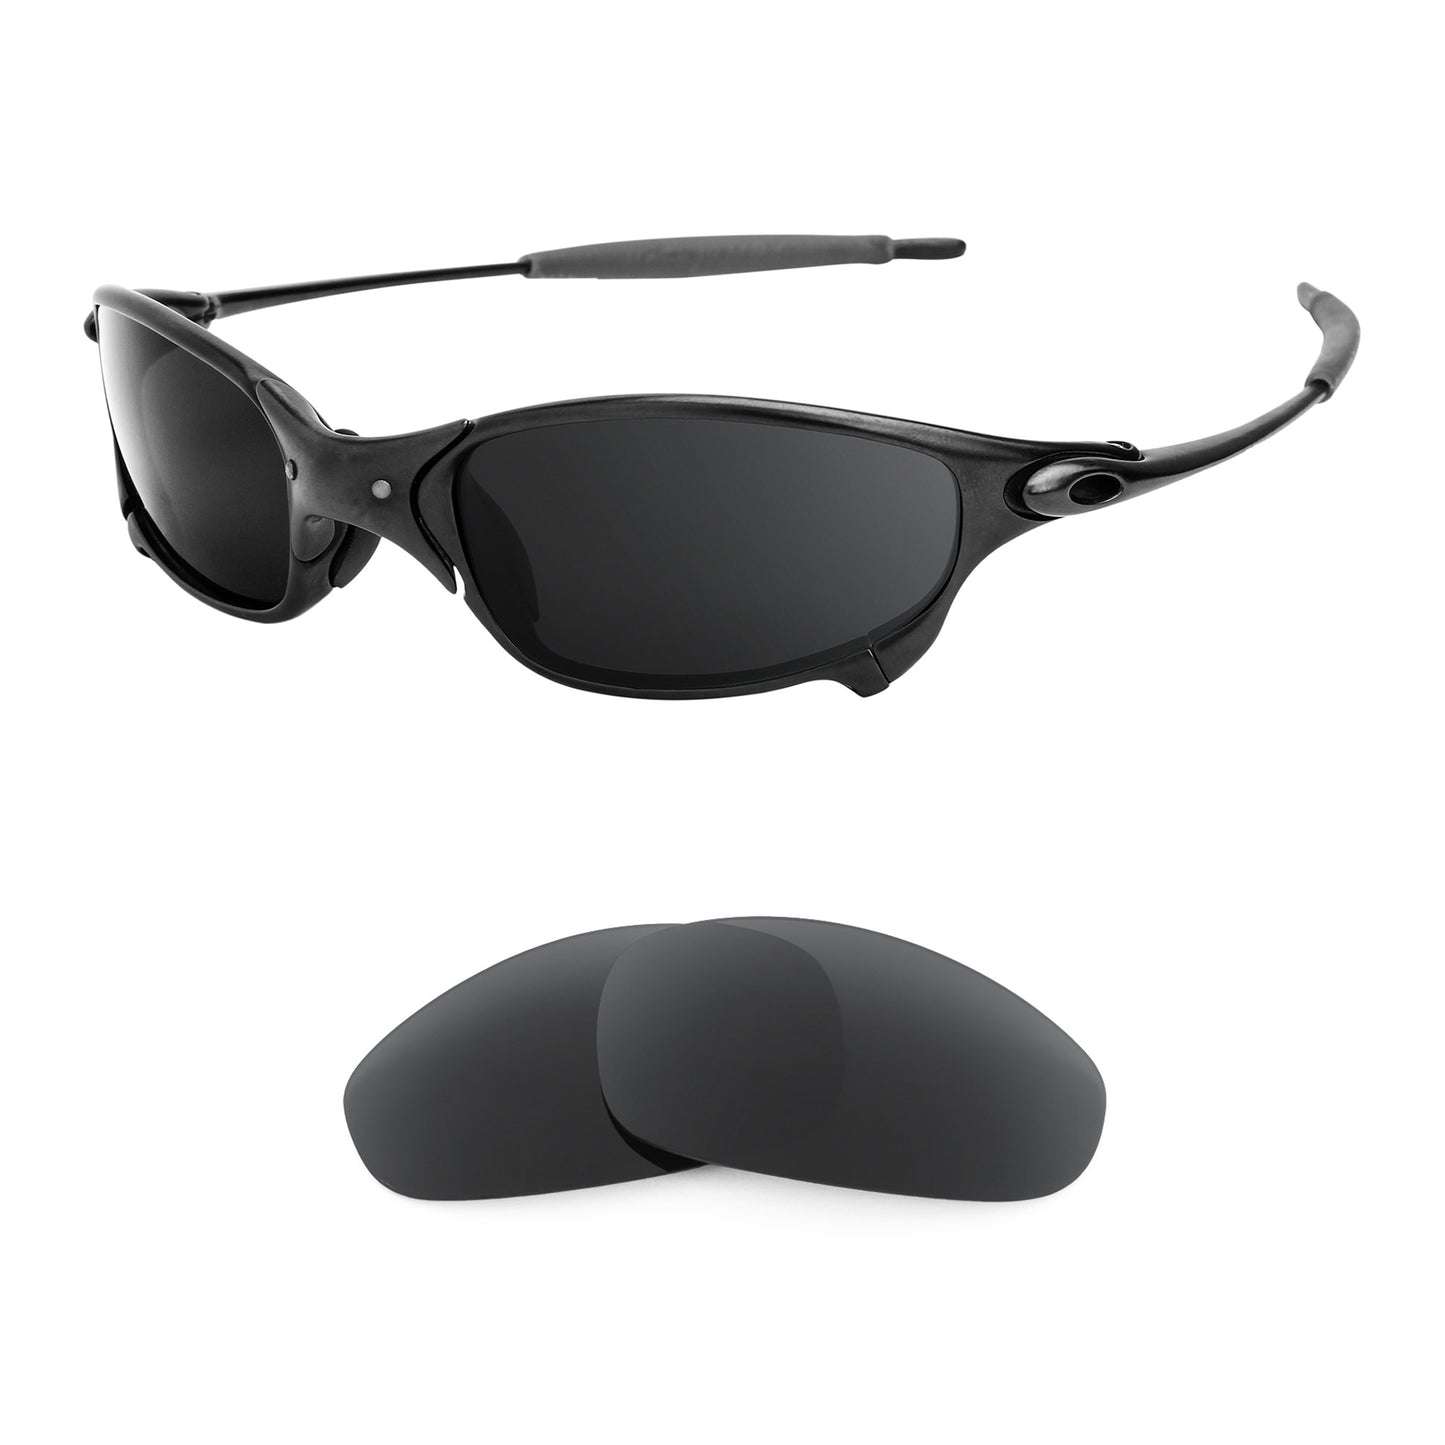 Oakley Juliet sunglasses with replacement lenses